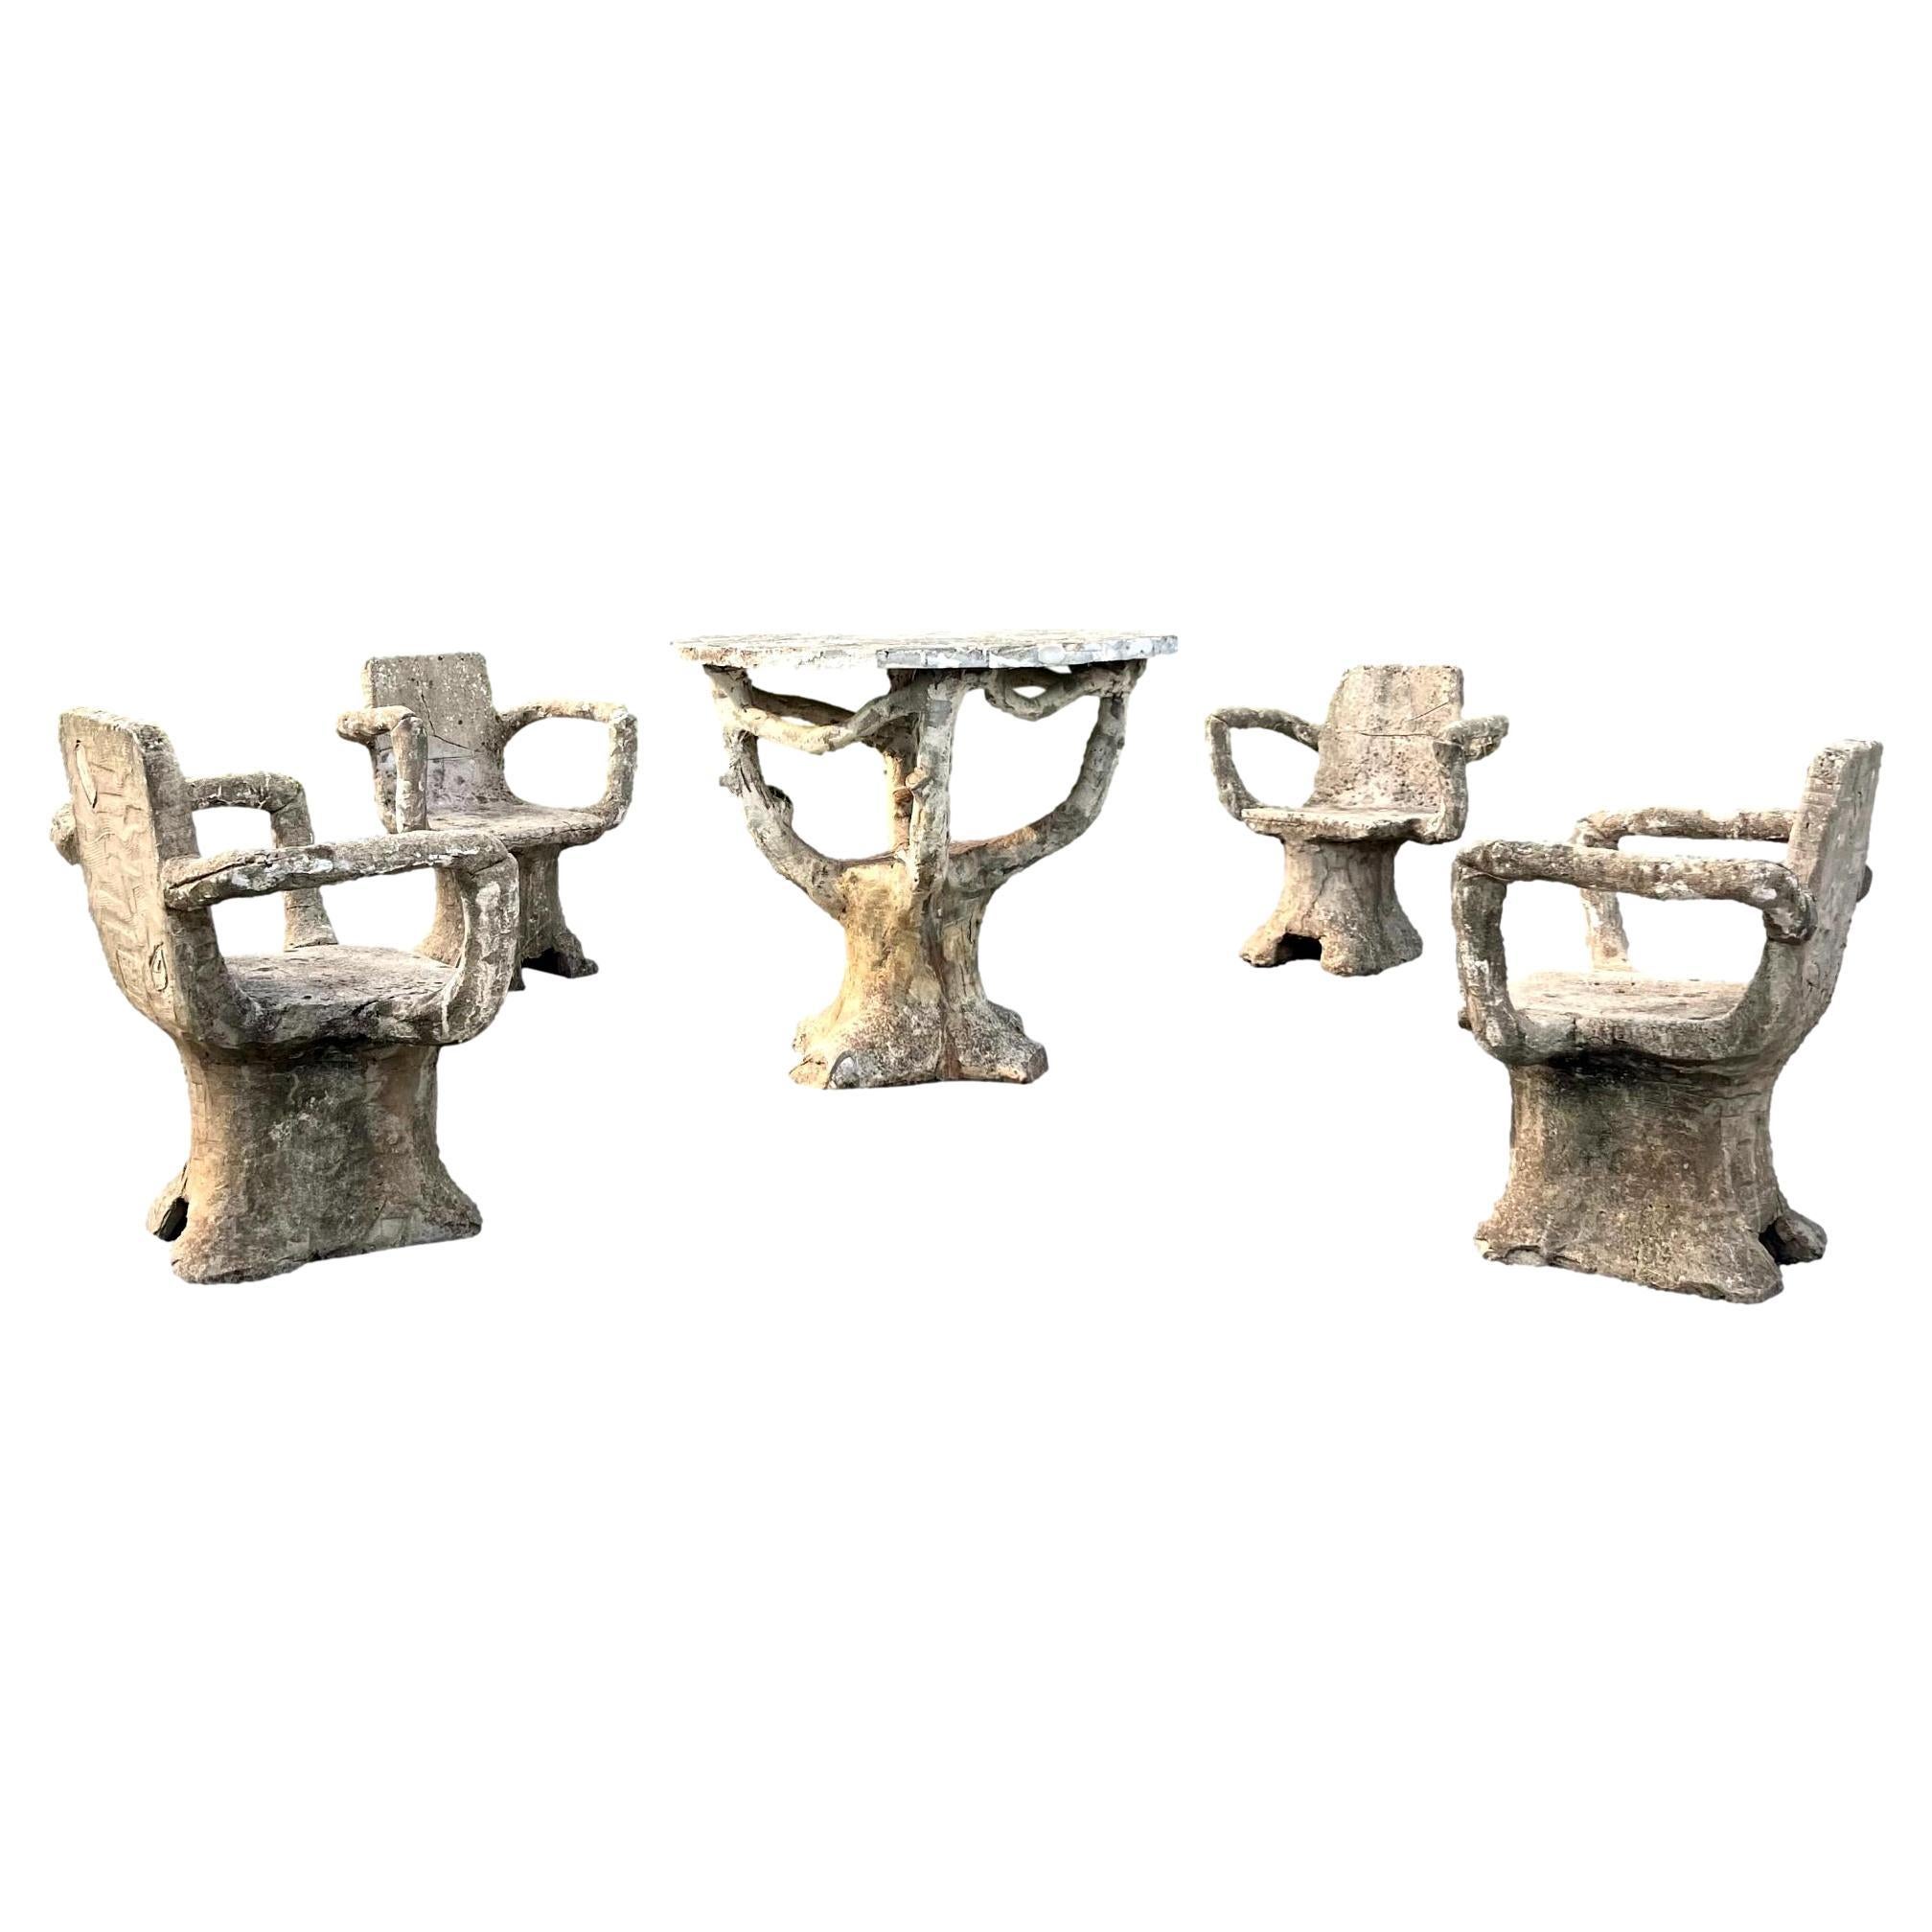 Anthropomorphic Faux Bois Concrete Table and 4 Chairs, 1950s France For Sale